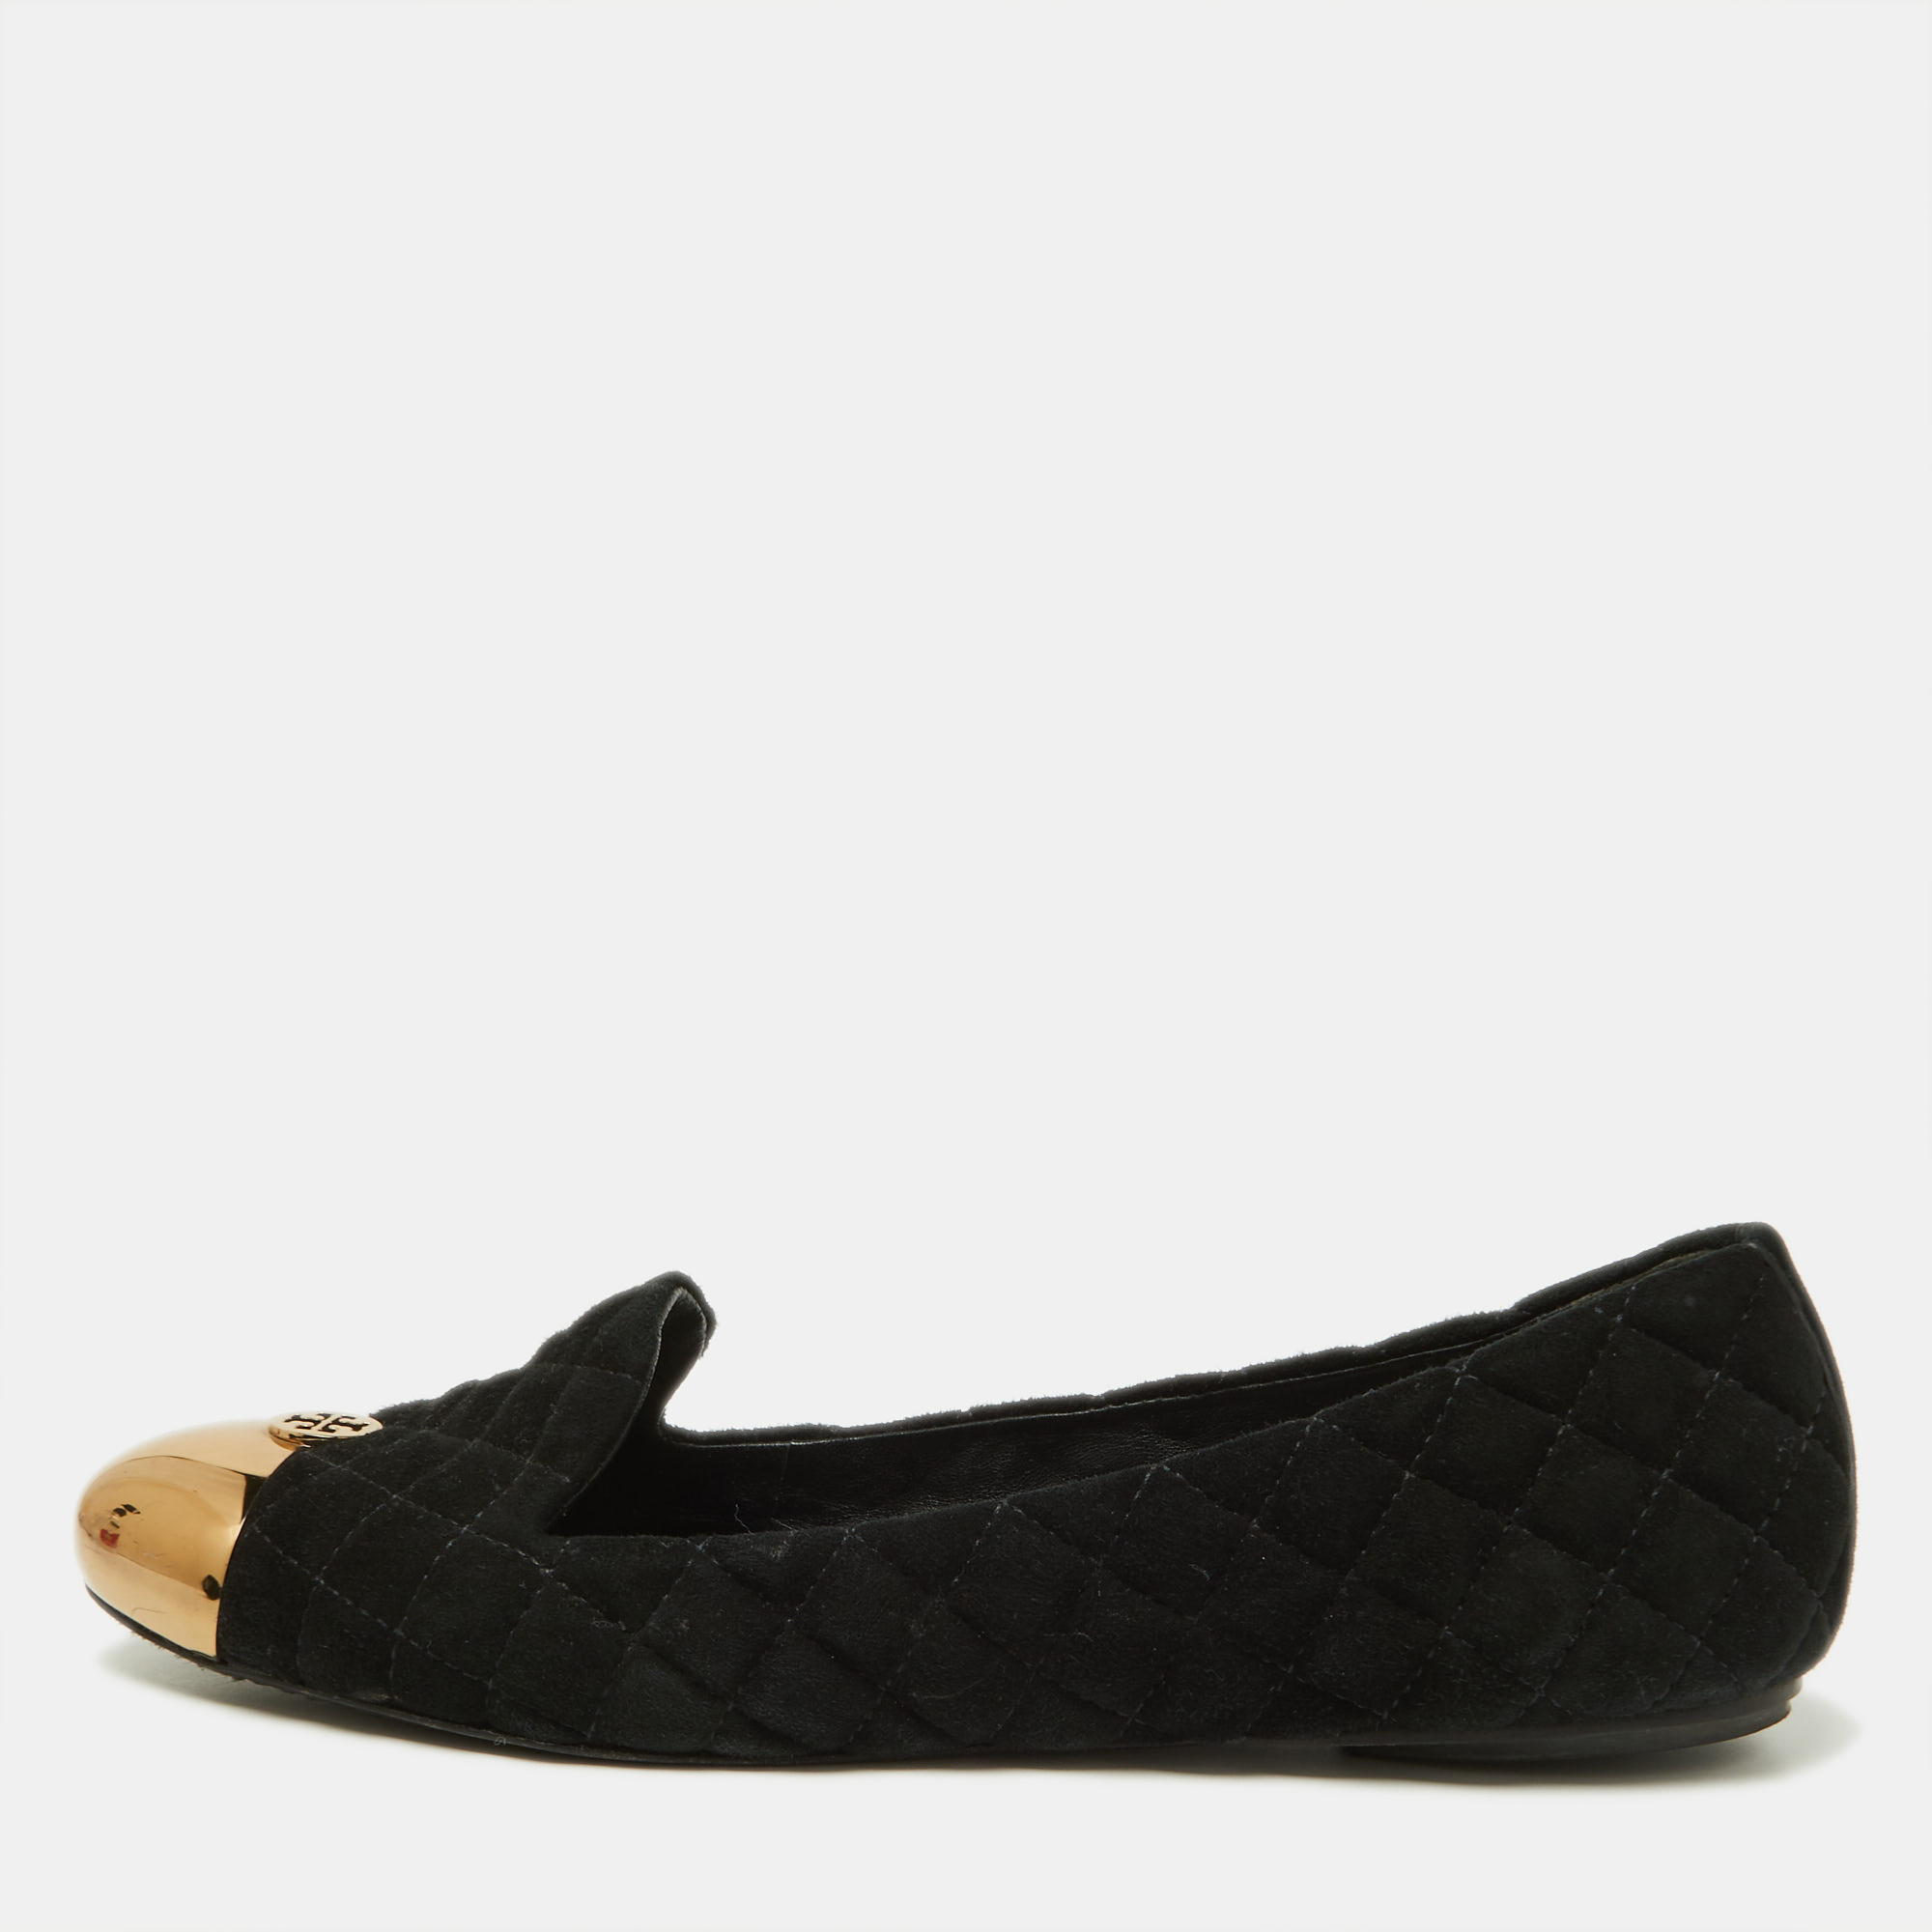 Tory Burch Black Quilted Suede Kaitlin Ballet Flats Size 41.5